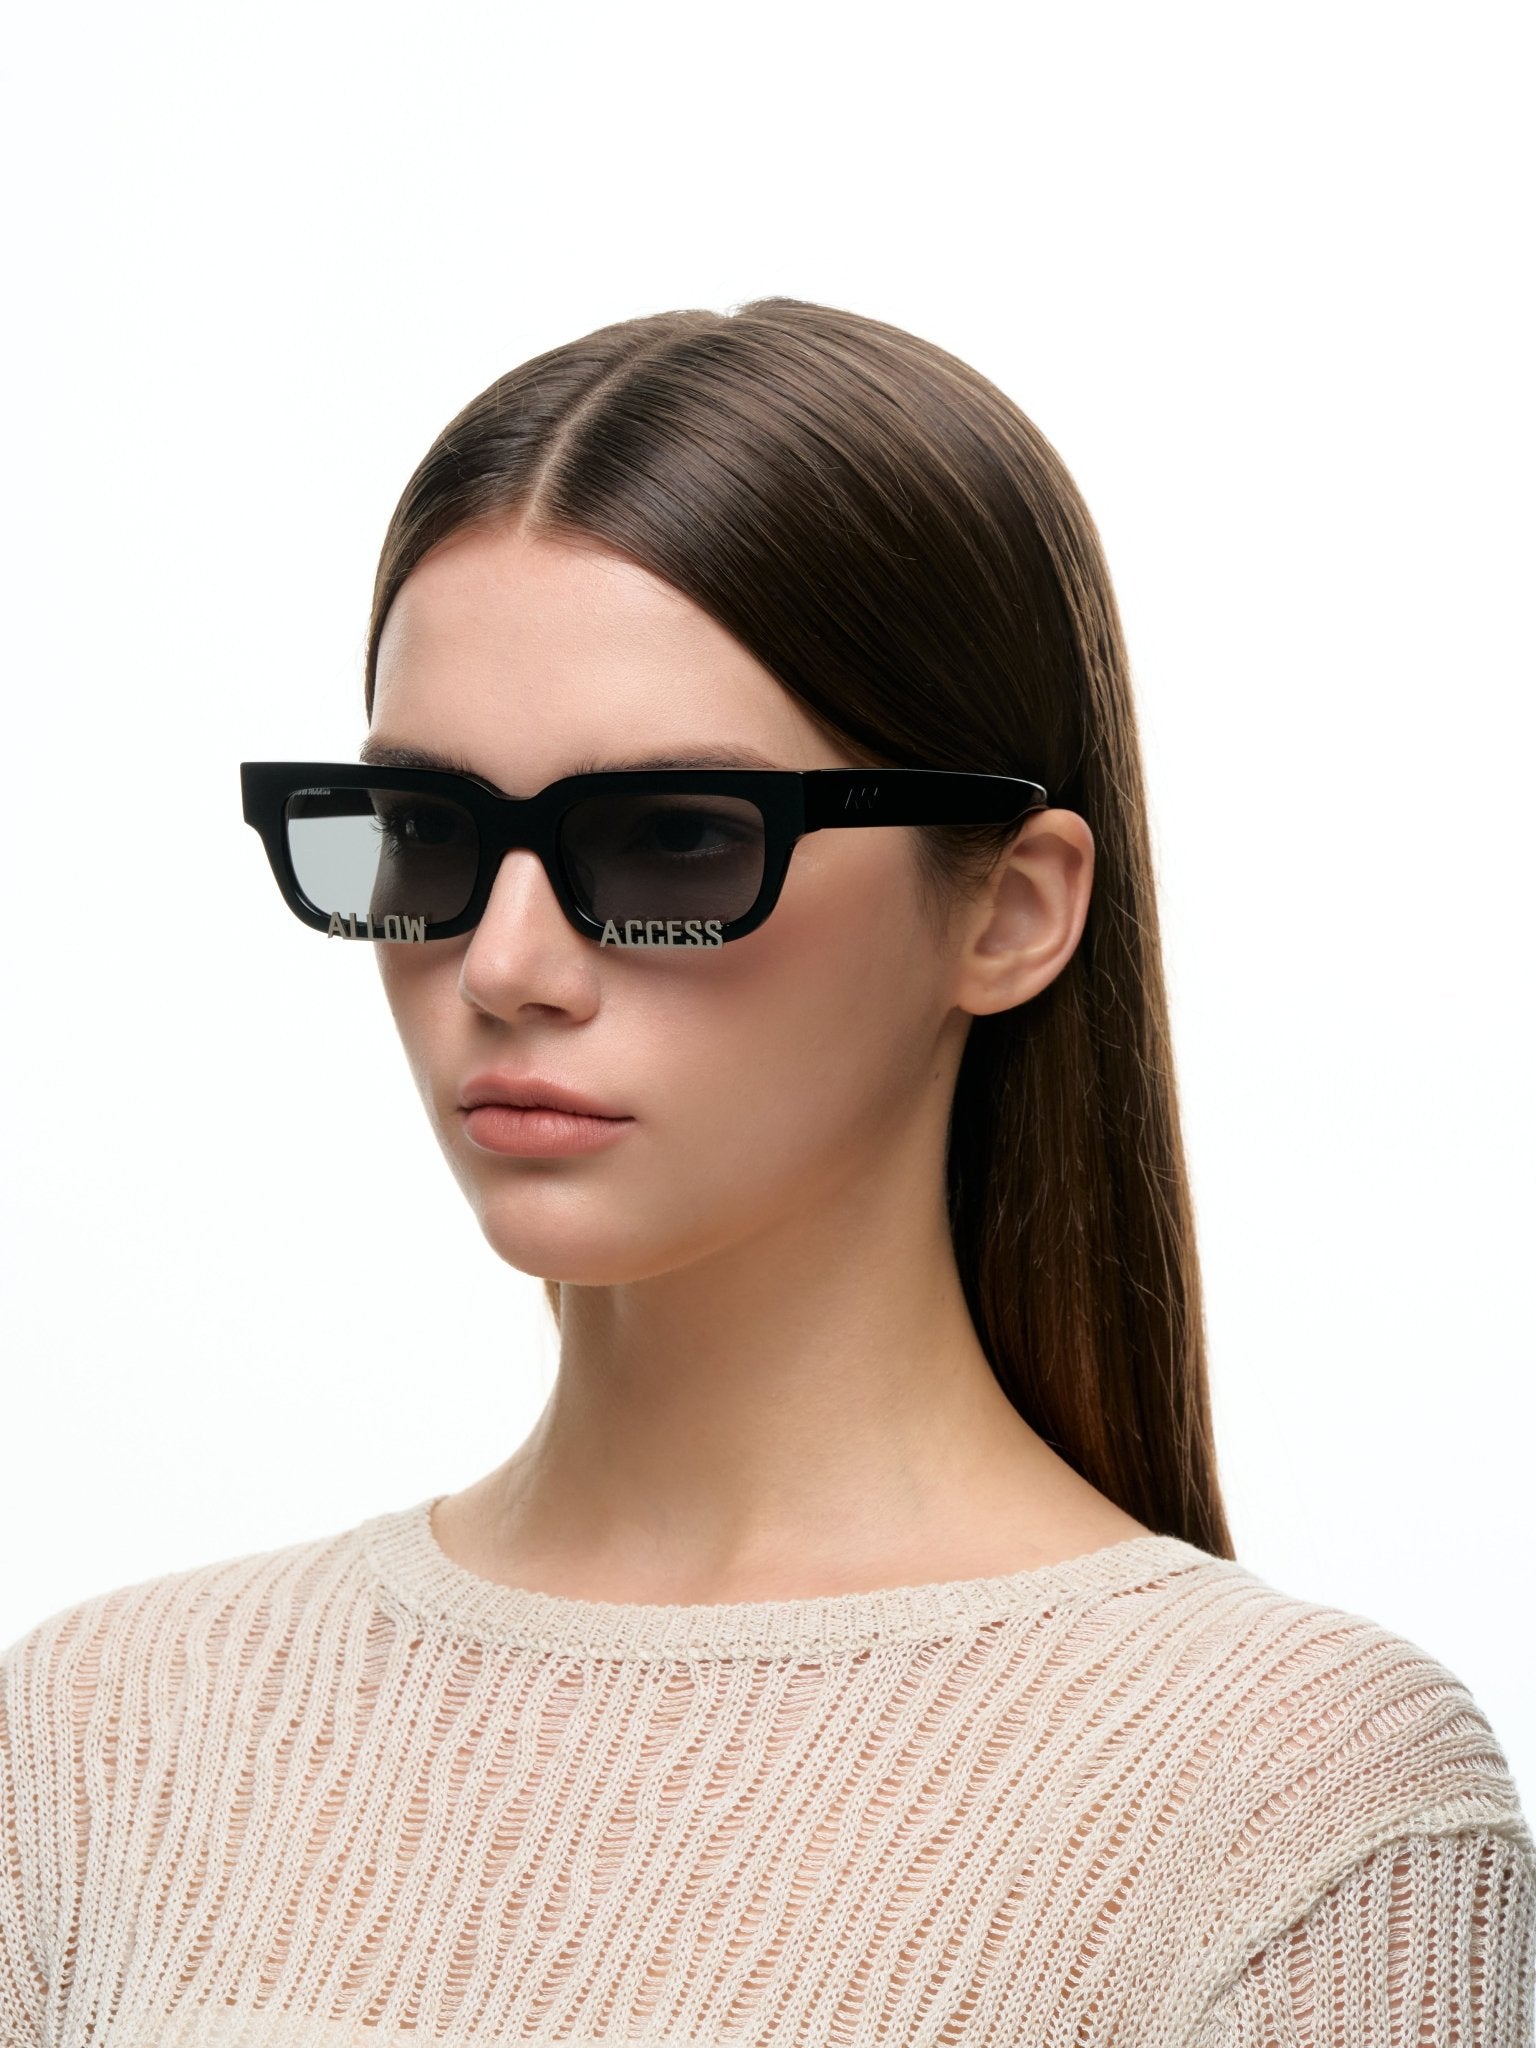 Allow Access Attraction Series Inception Sunglass In Black | MADA IN CHINA